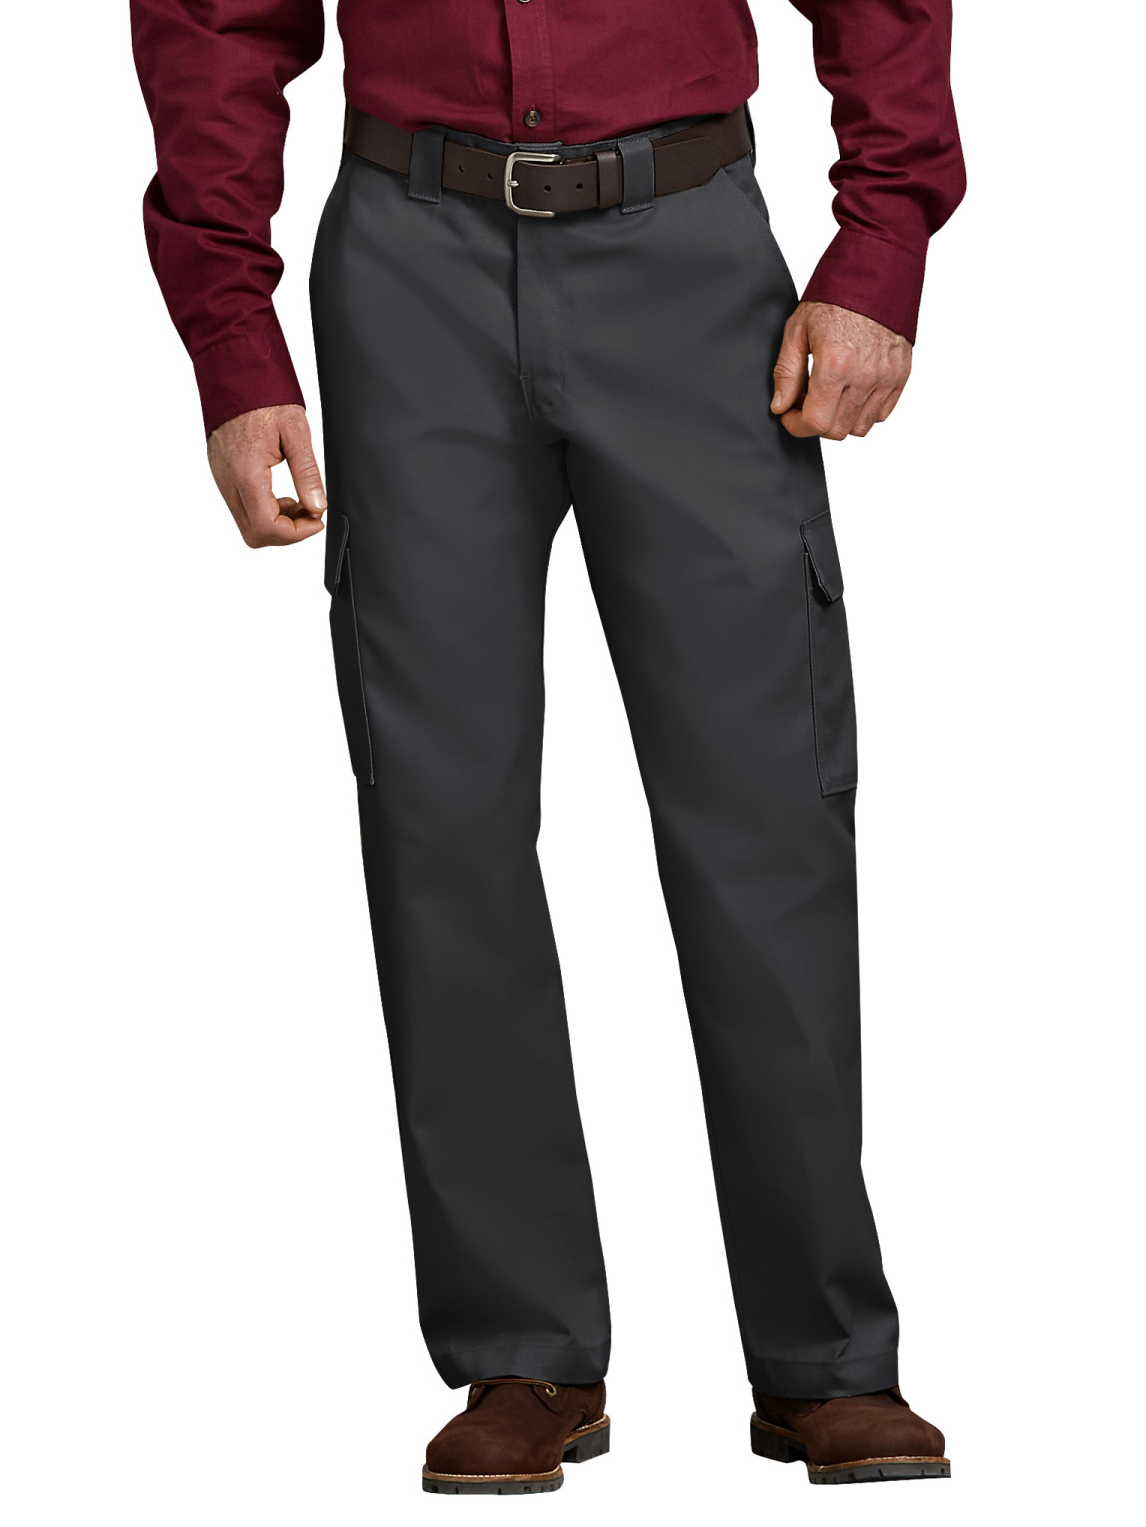 Dickies Mens and Big Mens Relaxed Fit Straight Leg Cargo Work Pants - image 1 of 2